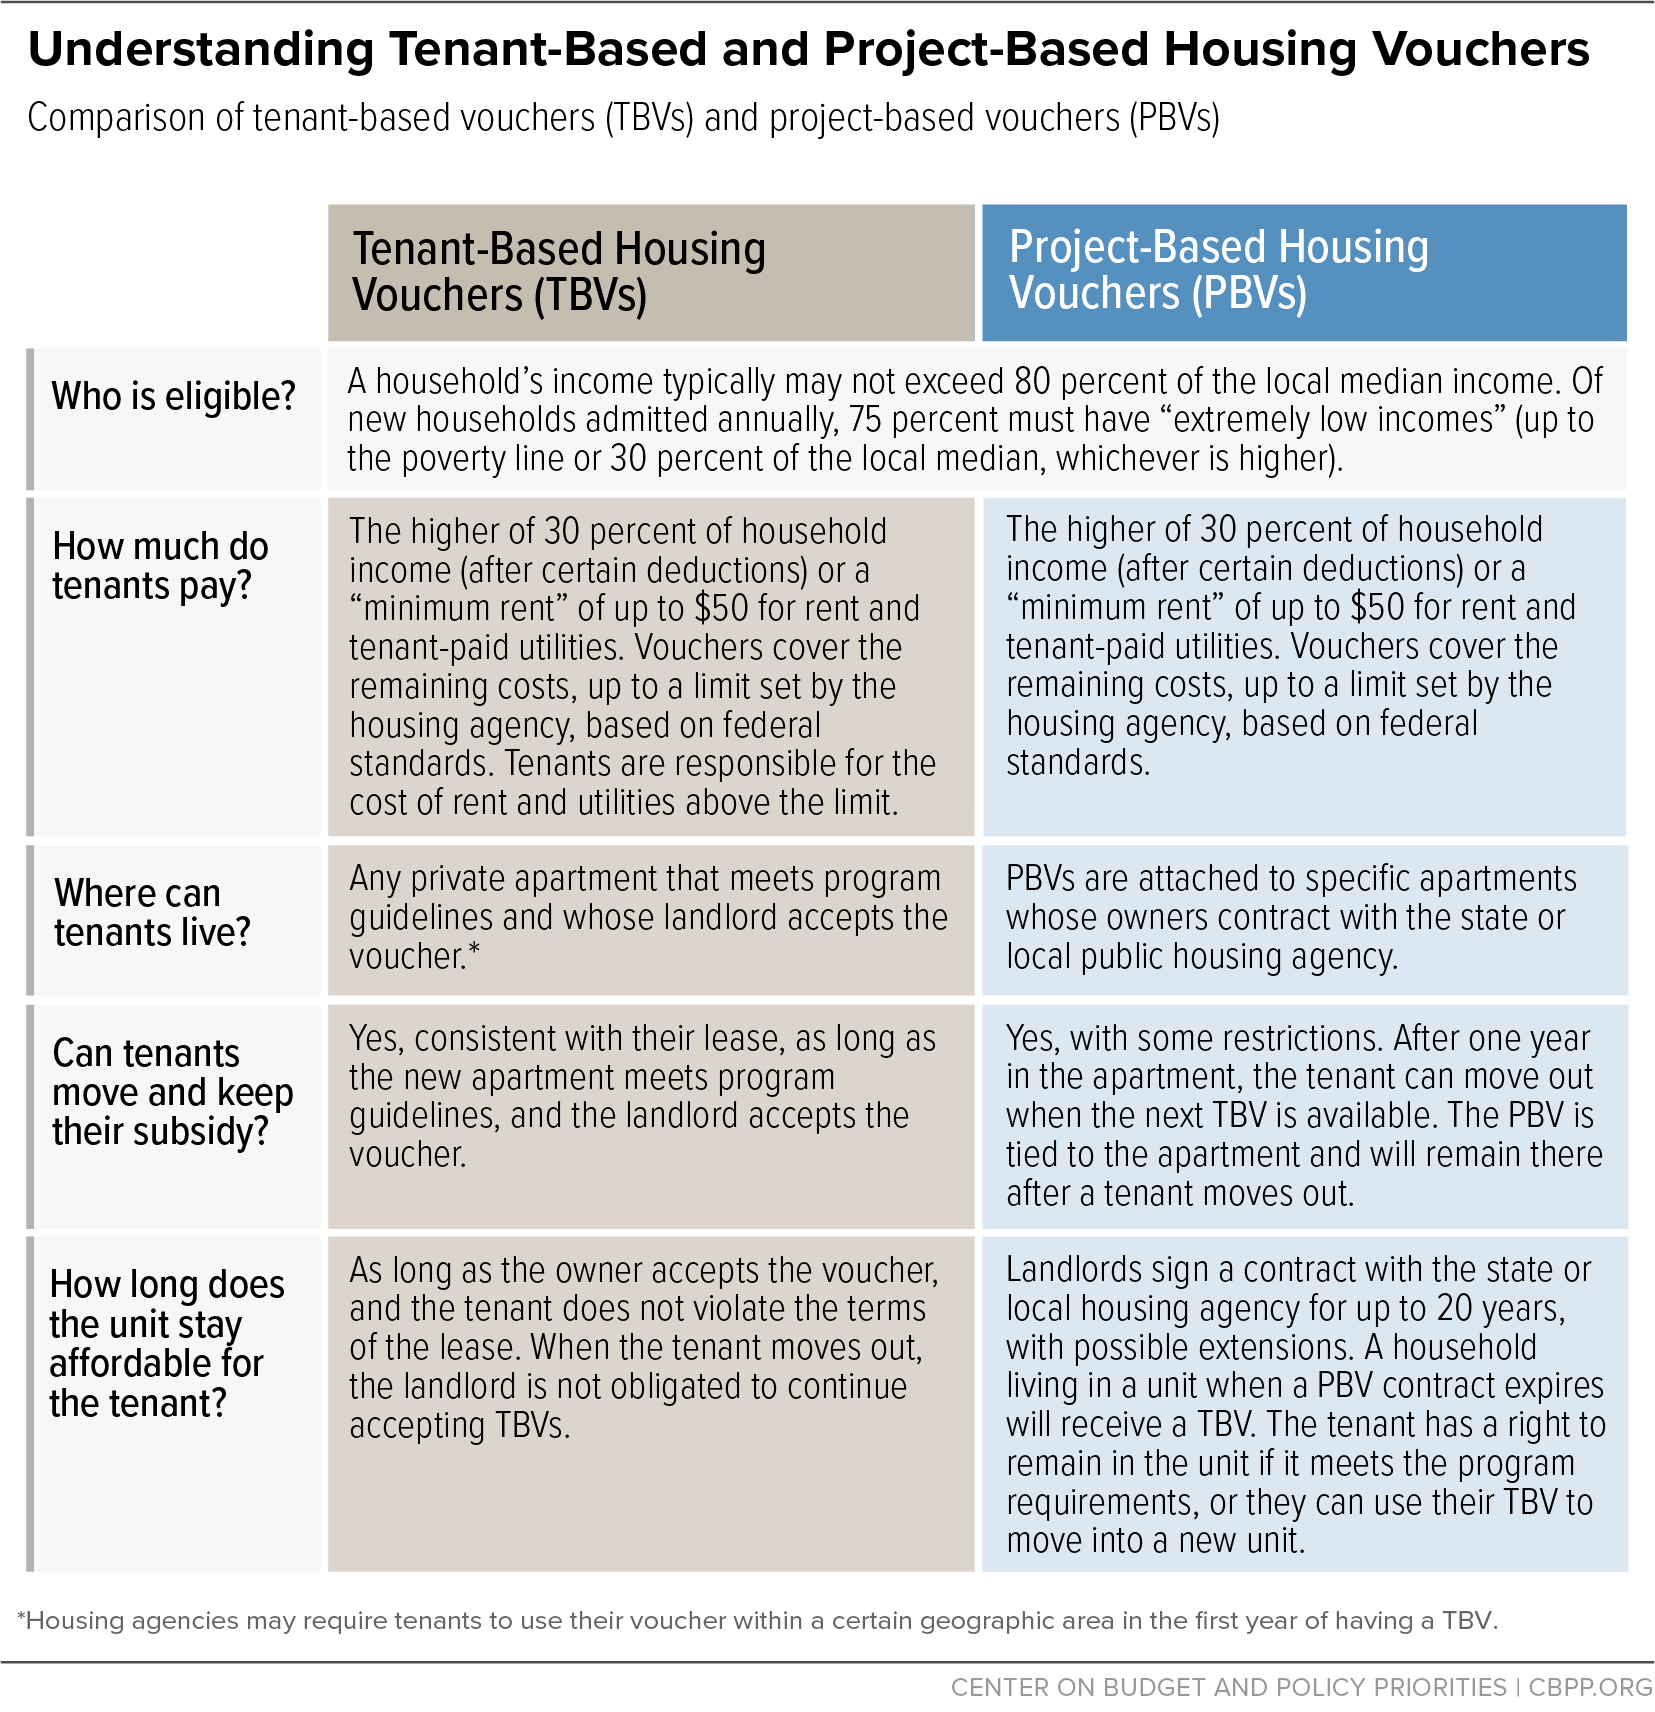 Understanding Tenant-Based and Project-Based Housing Vouchers